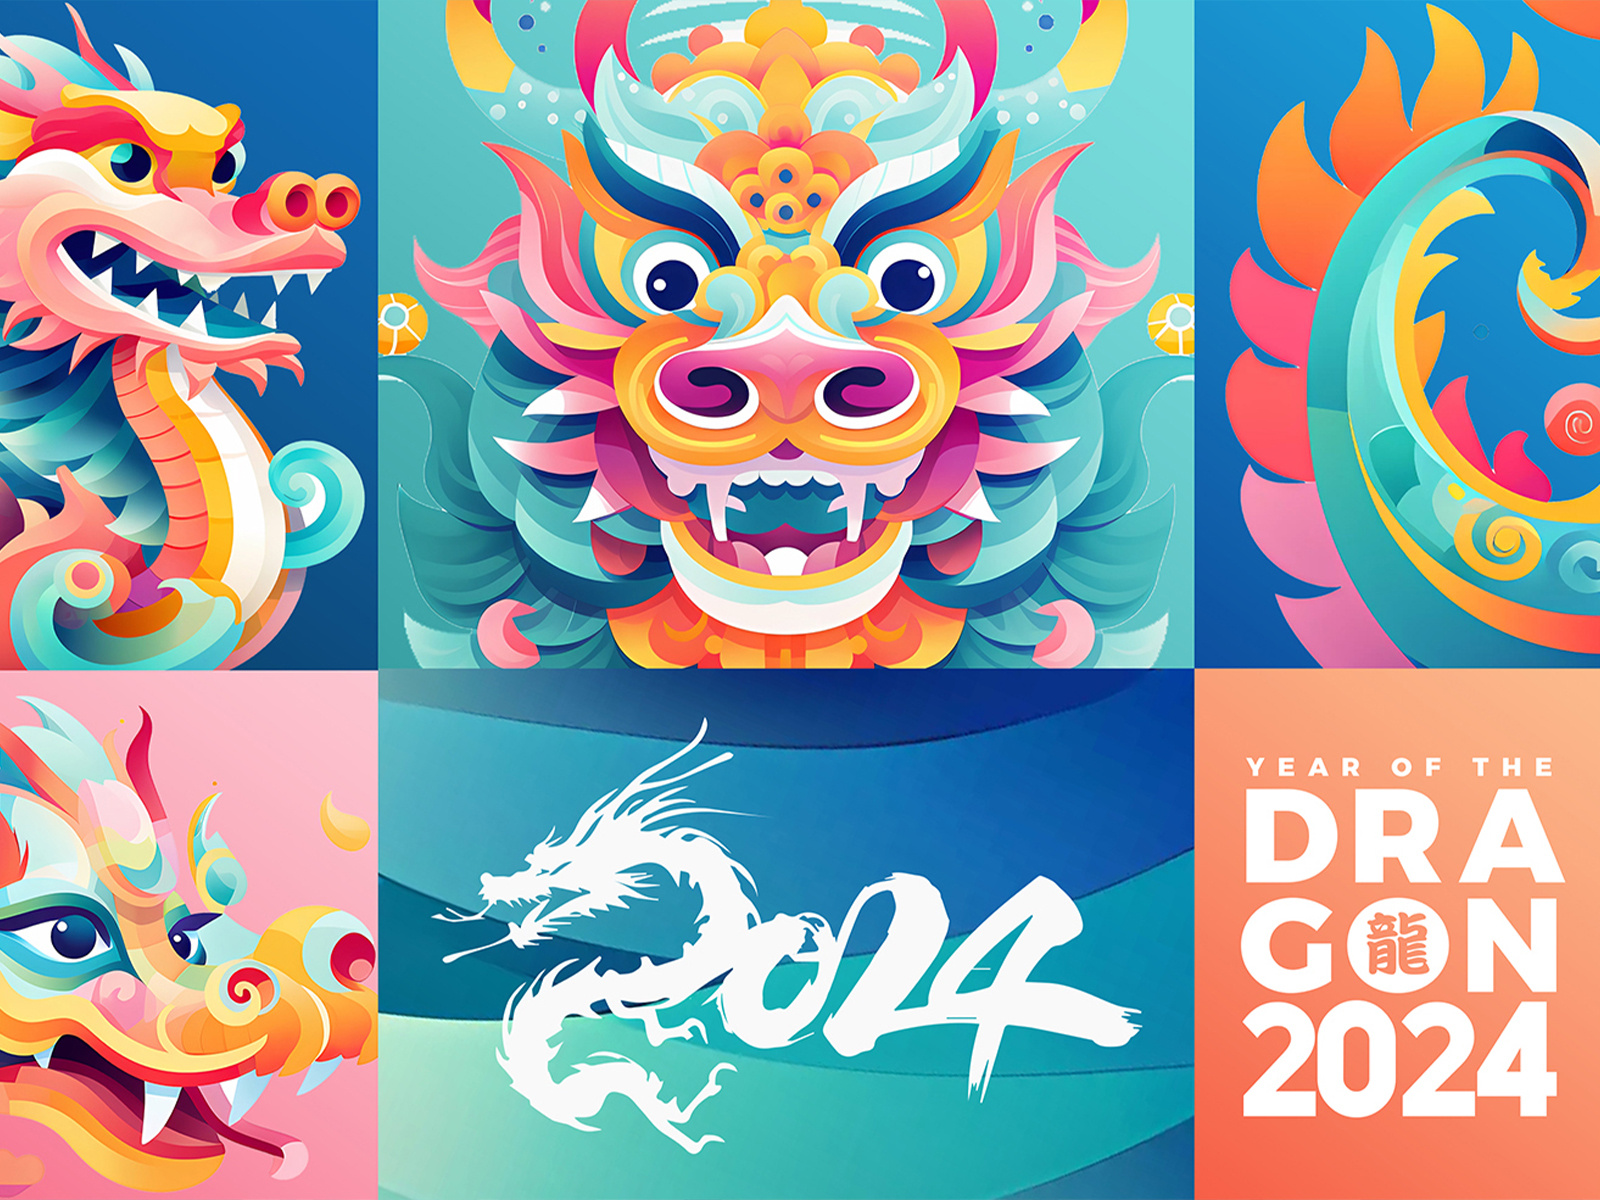 Chinese new year Dragon, dragon year 2024 by Lemongraphic on Dribbble